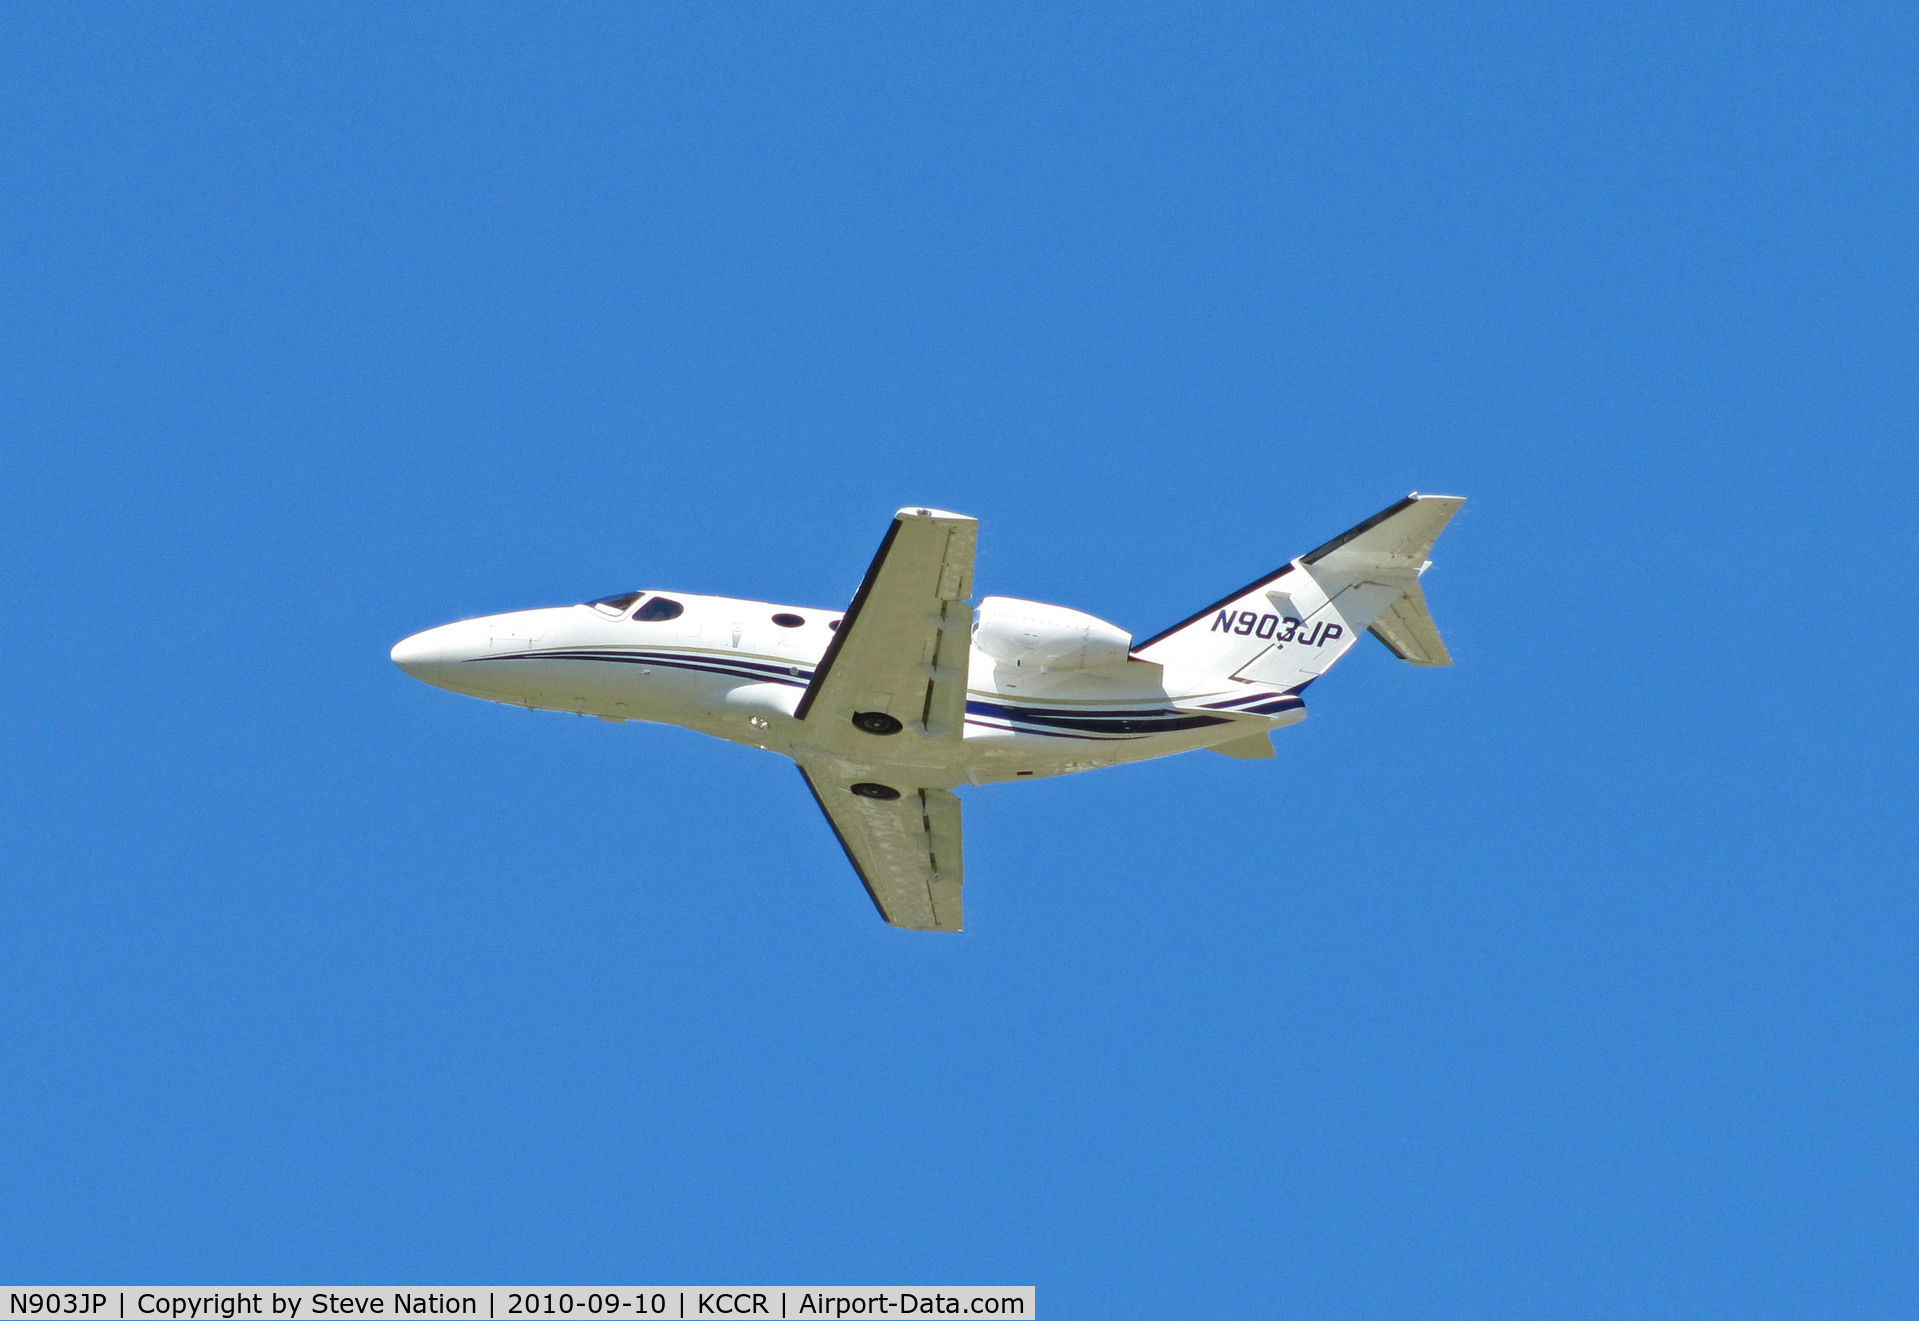 N903JP, 2008 Cessna 510 Citation Mustang C/N 510-0102, Promag Retail Services 2008 Cessna 510 climbs out from RWY19L from home base